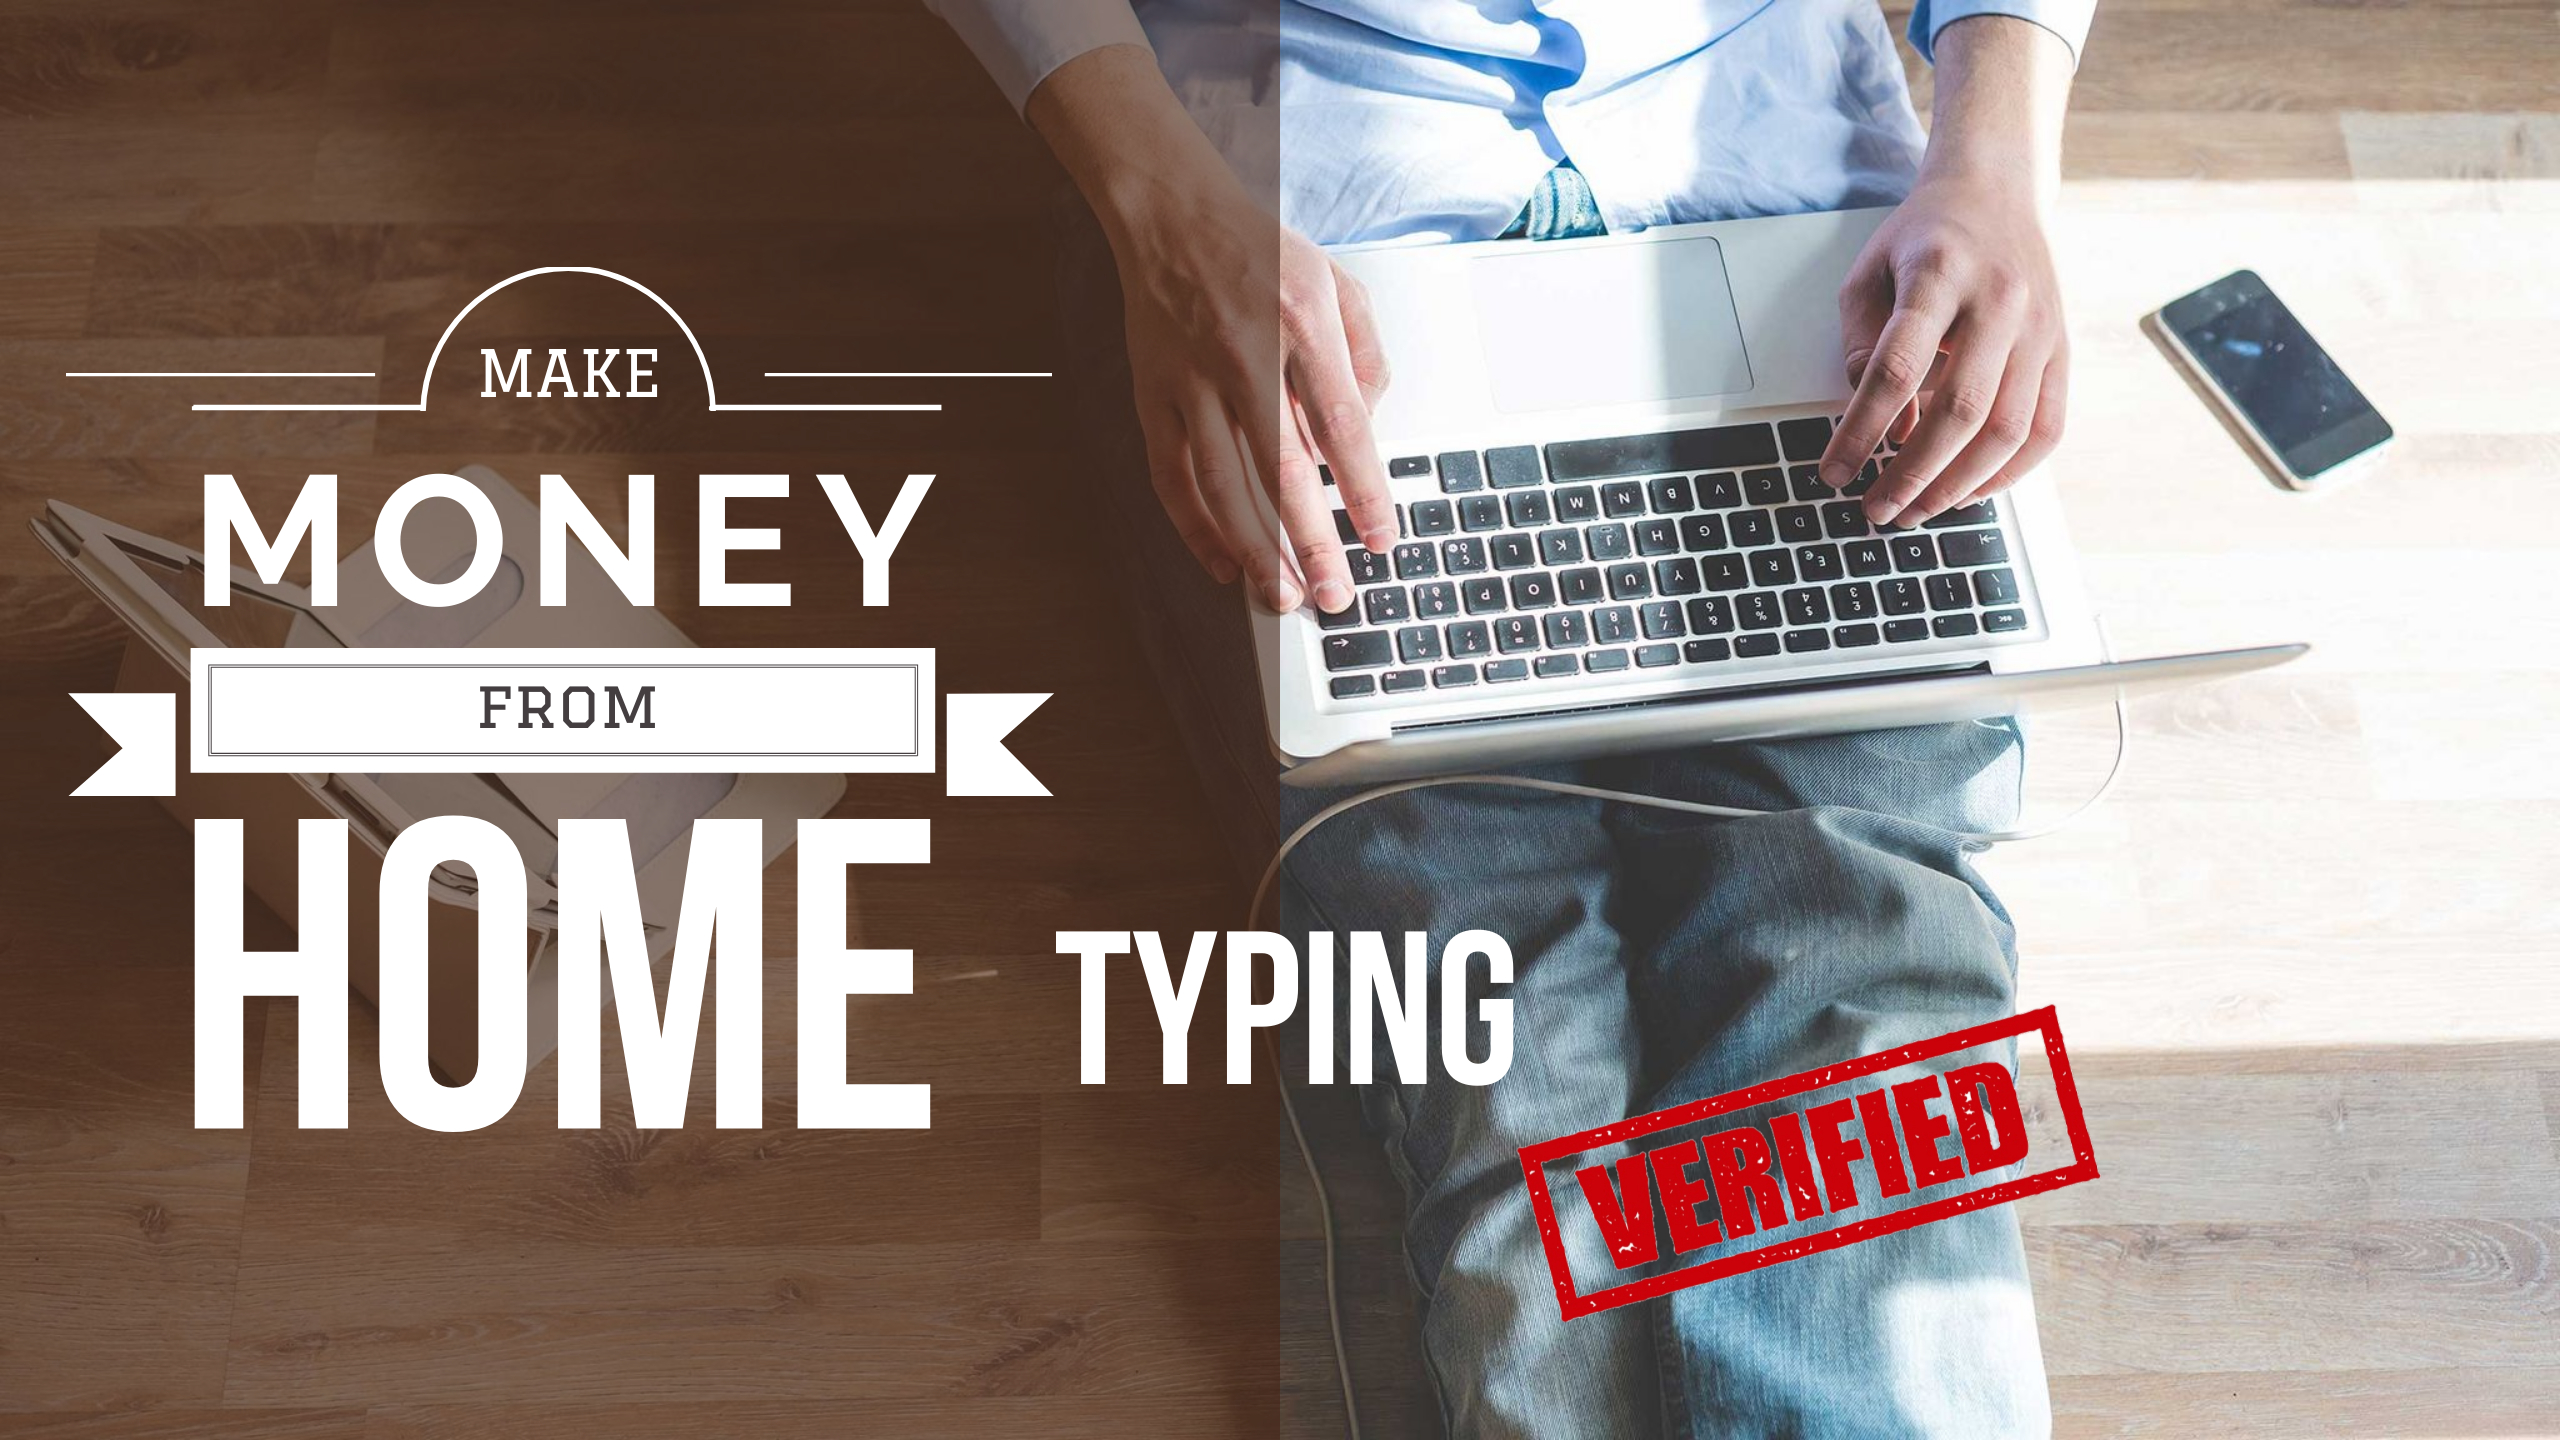 Make Money Online - 75 Companies That Pay You To Work From Home Typing Documents